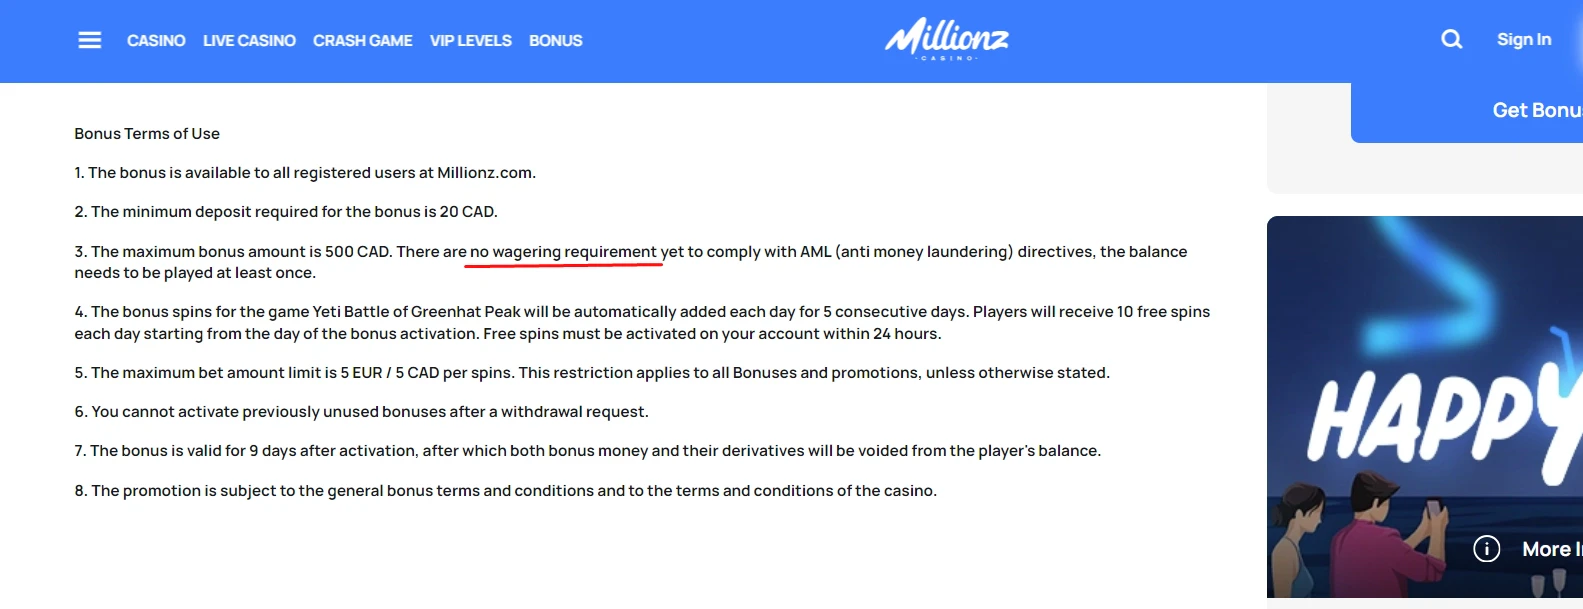 Millionz bonus terms and conditions